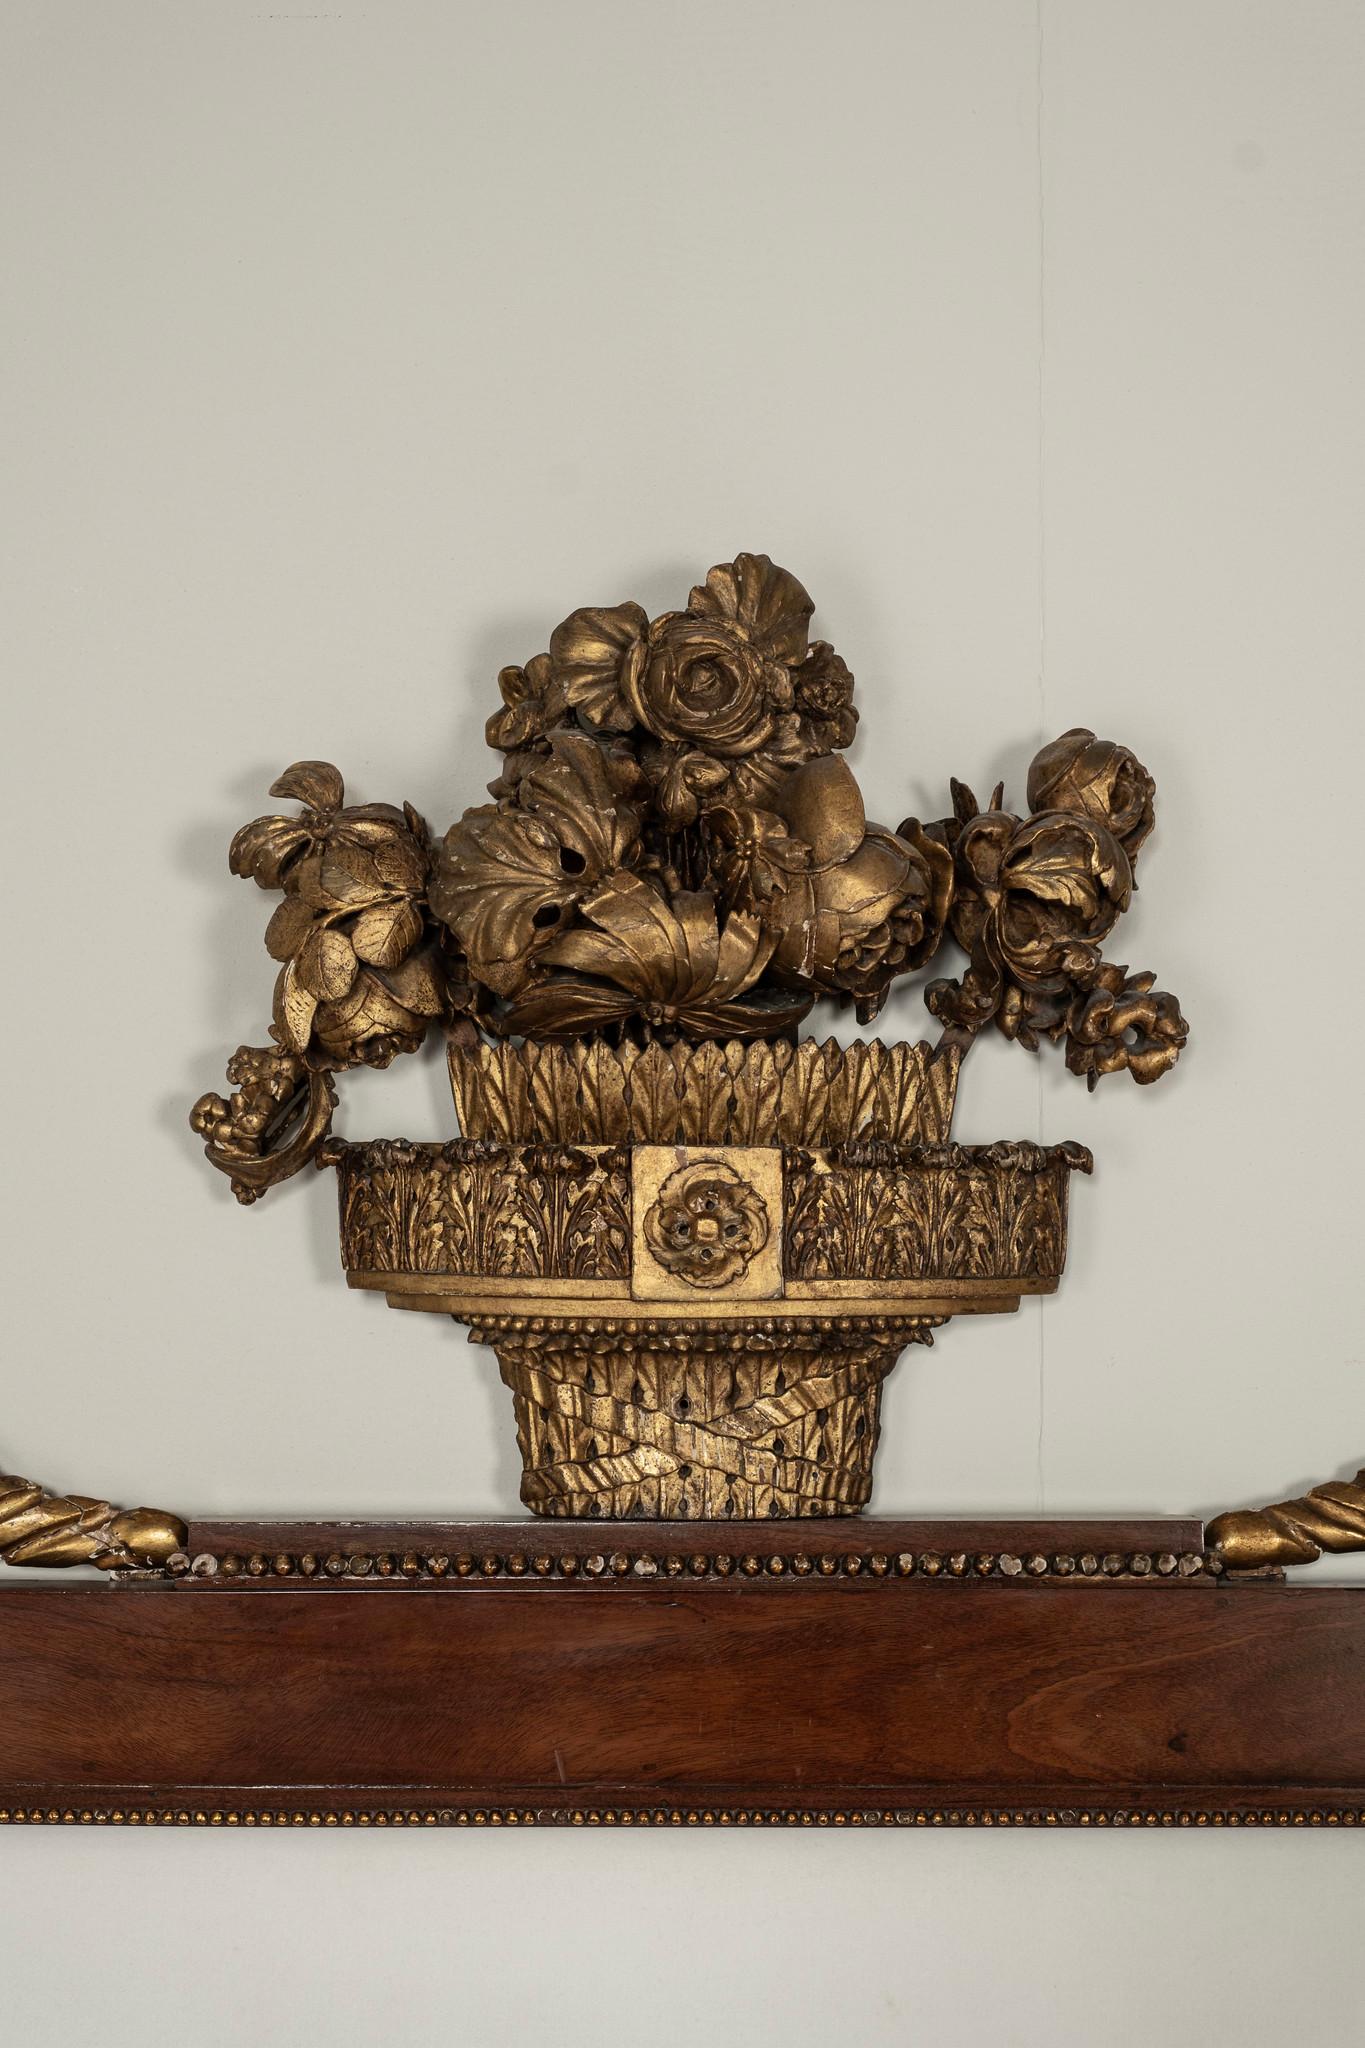 A period Italian Empire queen bed beautifully carved with Neoclassical influences to include acanthus finials, flourishing floral fauna, reeding and ribbon regalia.